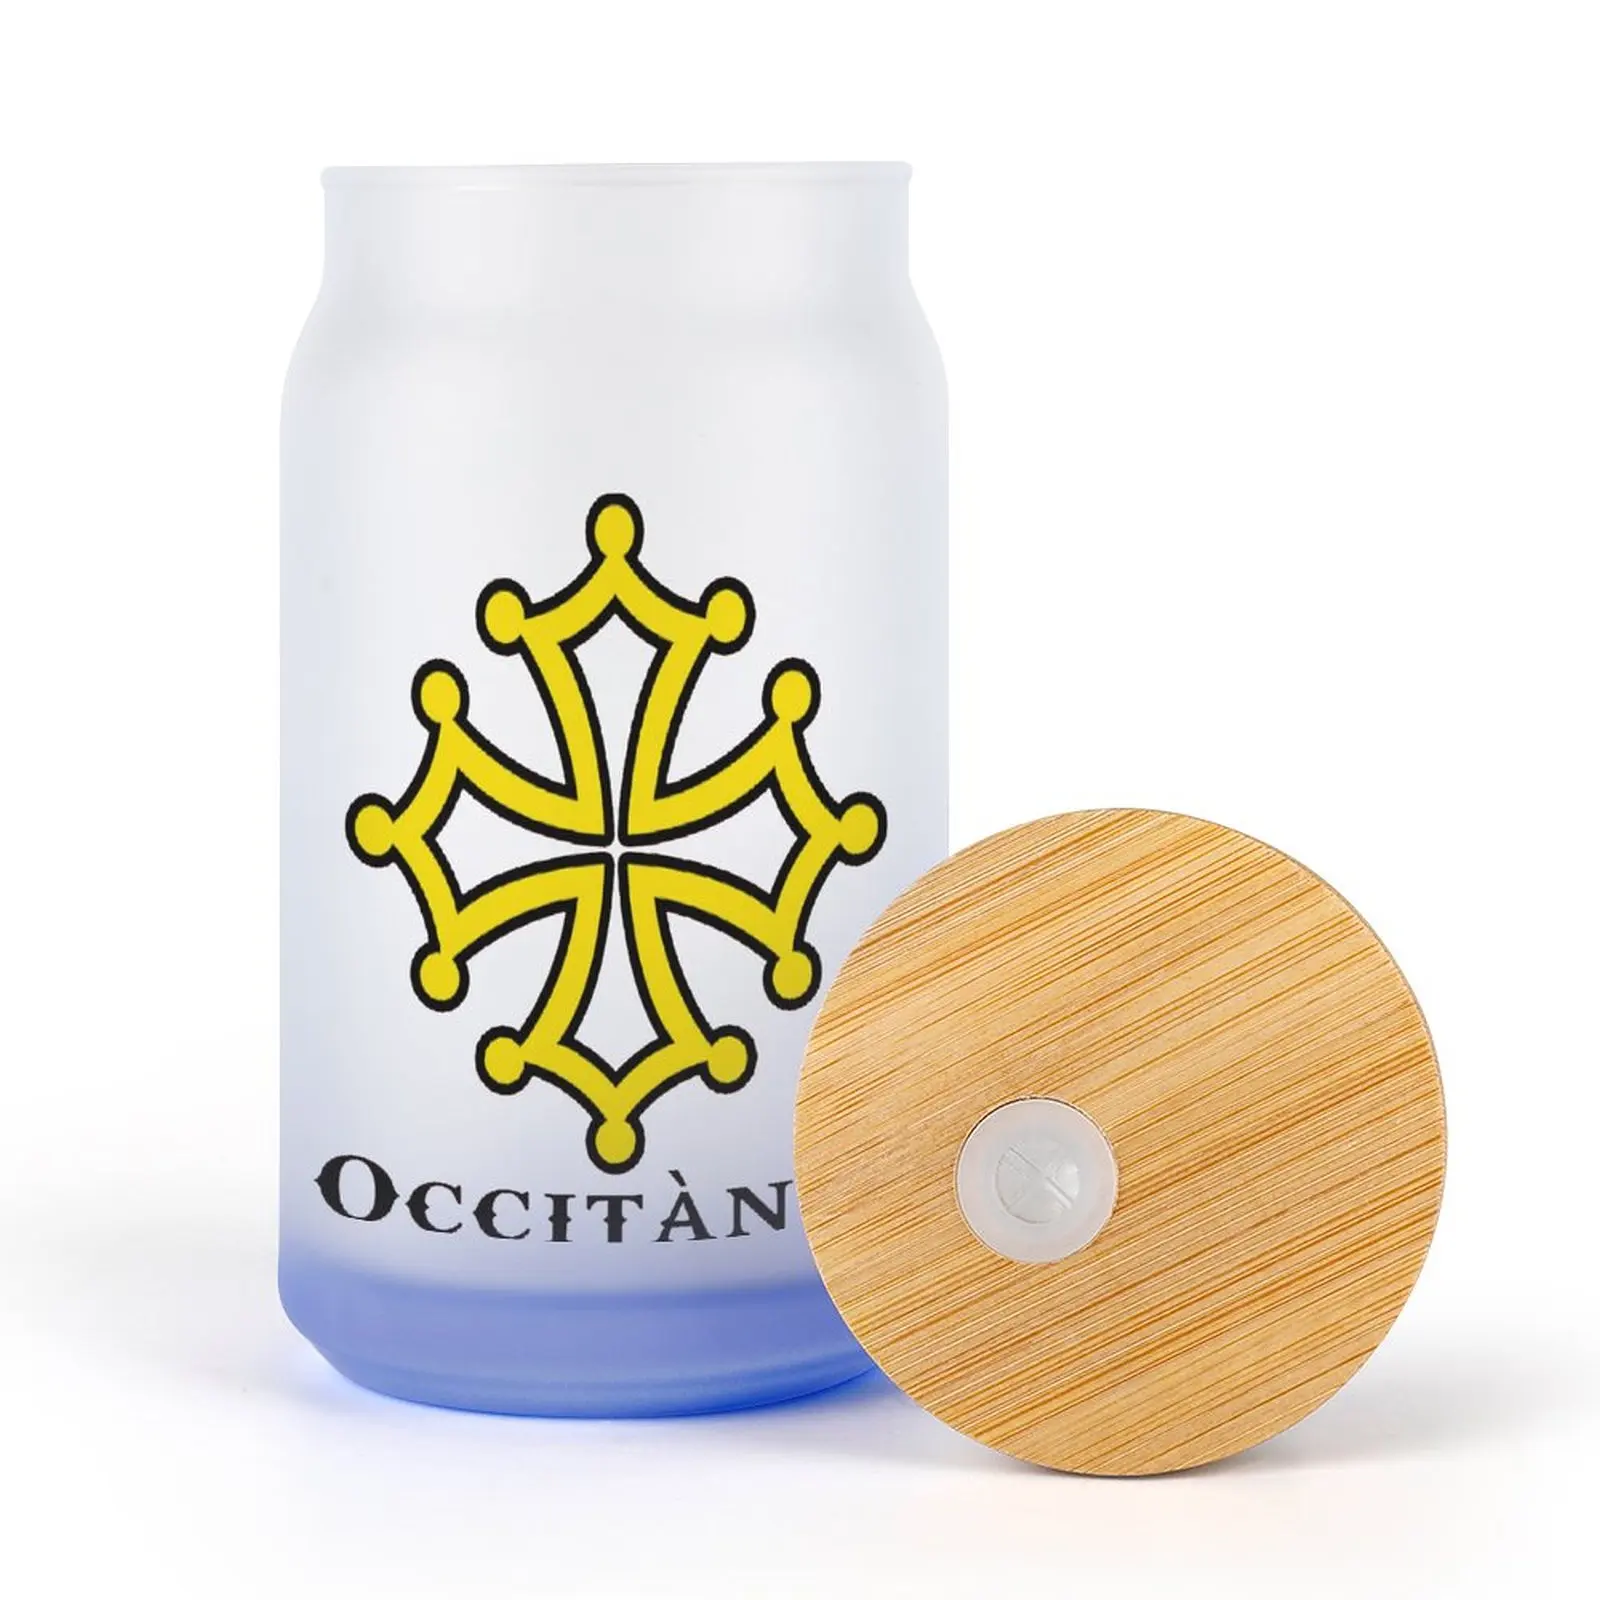 

Frosted Glass Pipette Cup Gradient Effect Mug Croix Occitane Pays D'oc Occitanie Essential Creative Humor Graphic Bottle Multi-